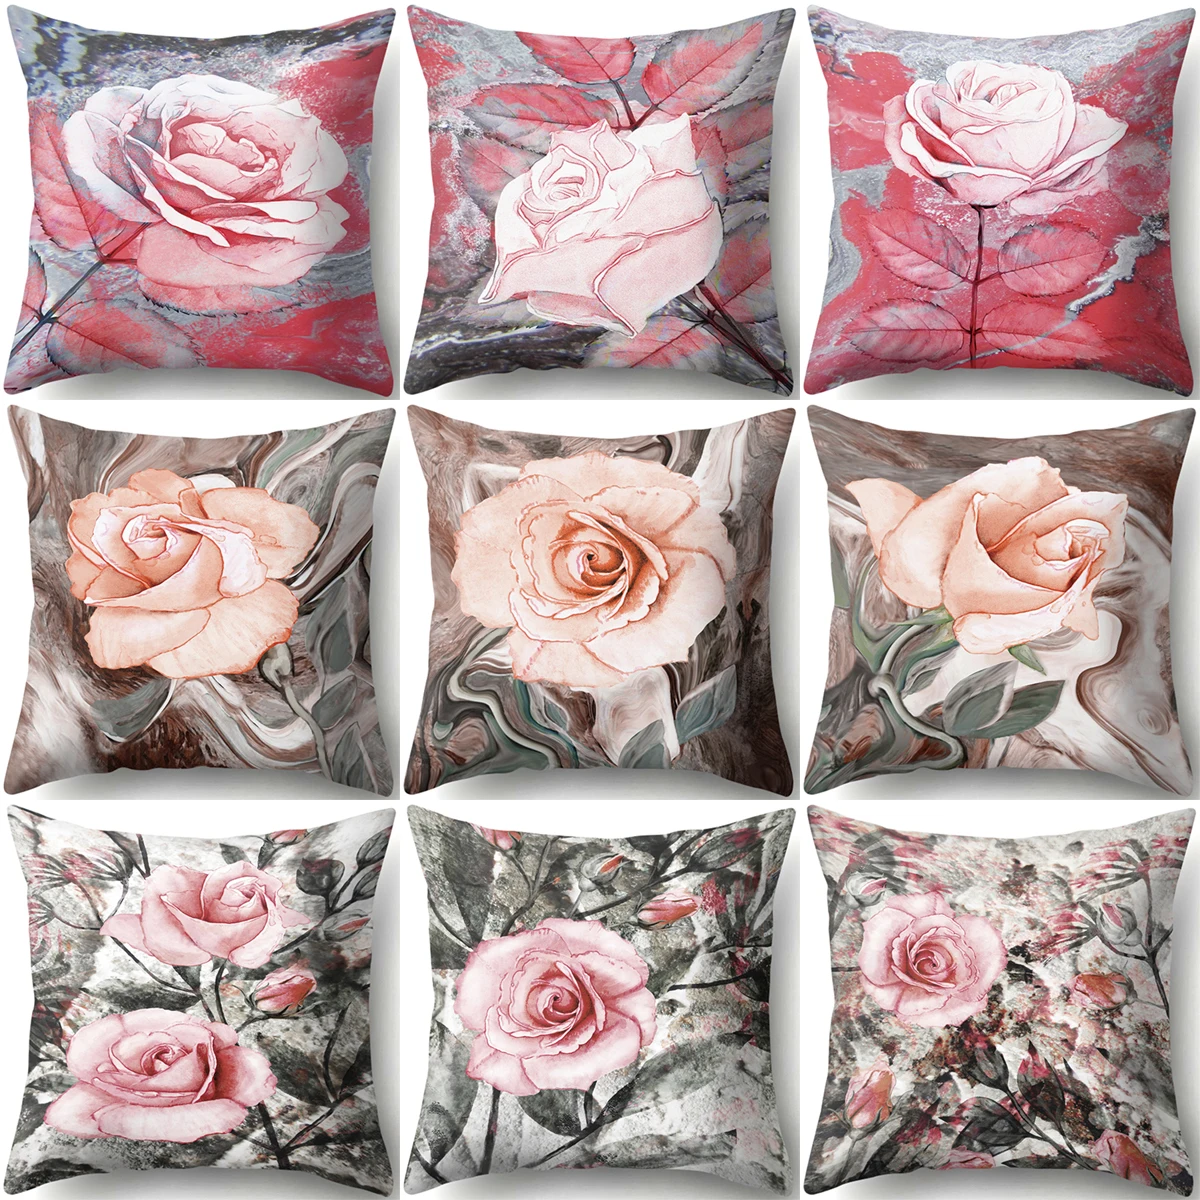 

ZHENHE Hand Painted Pink Peach Blossom Pillow Case Home Decoration Cushion Cover Bedroom Sofa Decor Pillow Cover 18x18 Inch